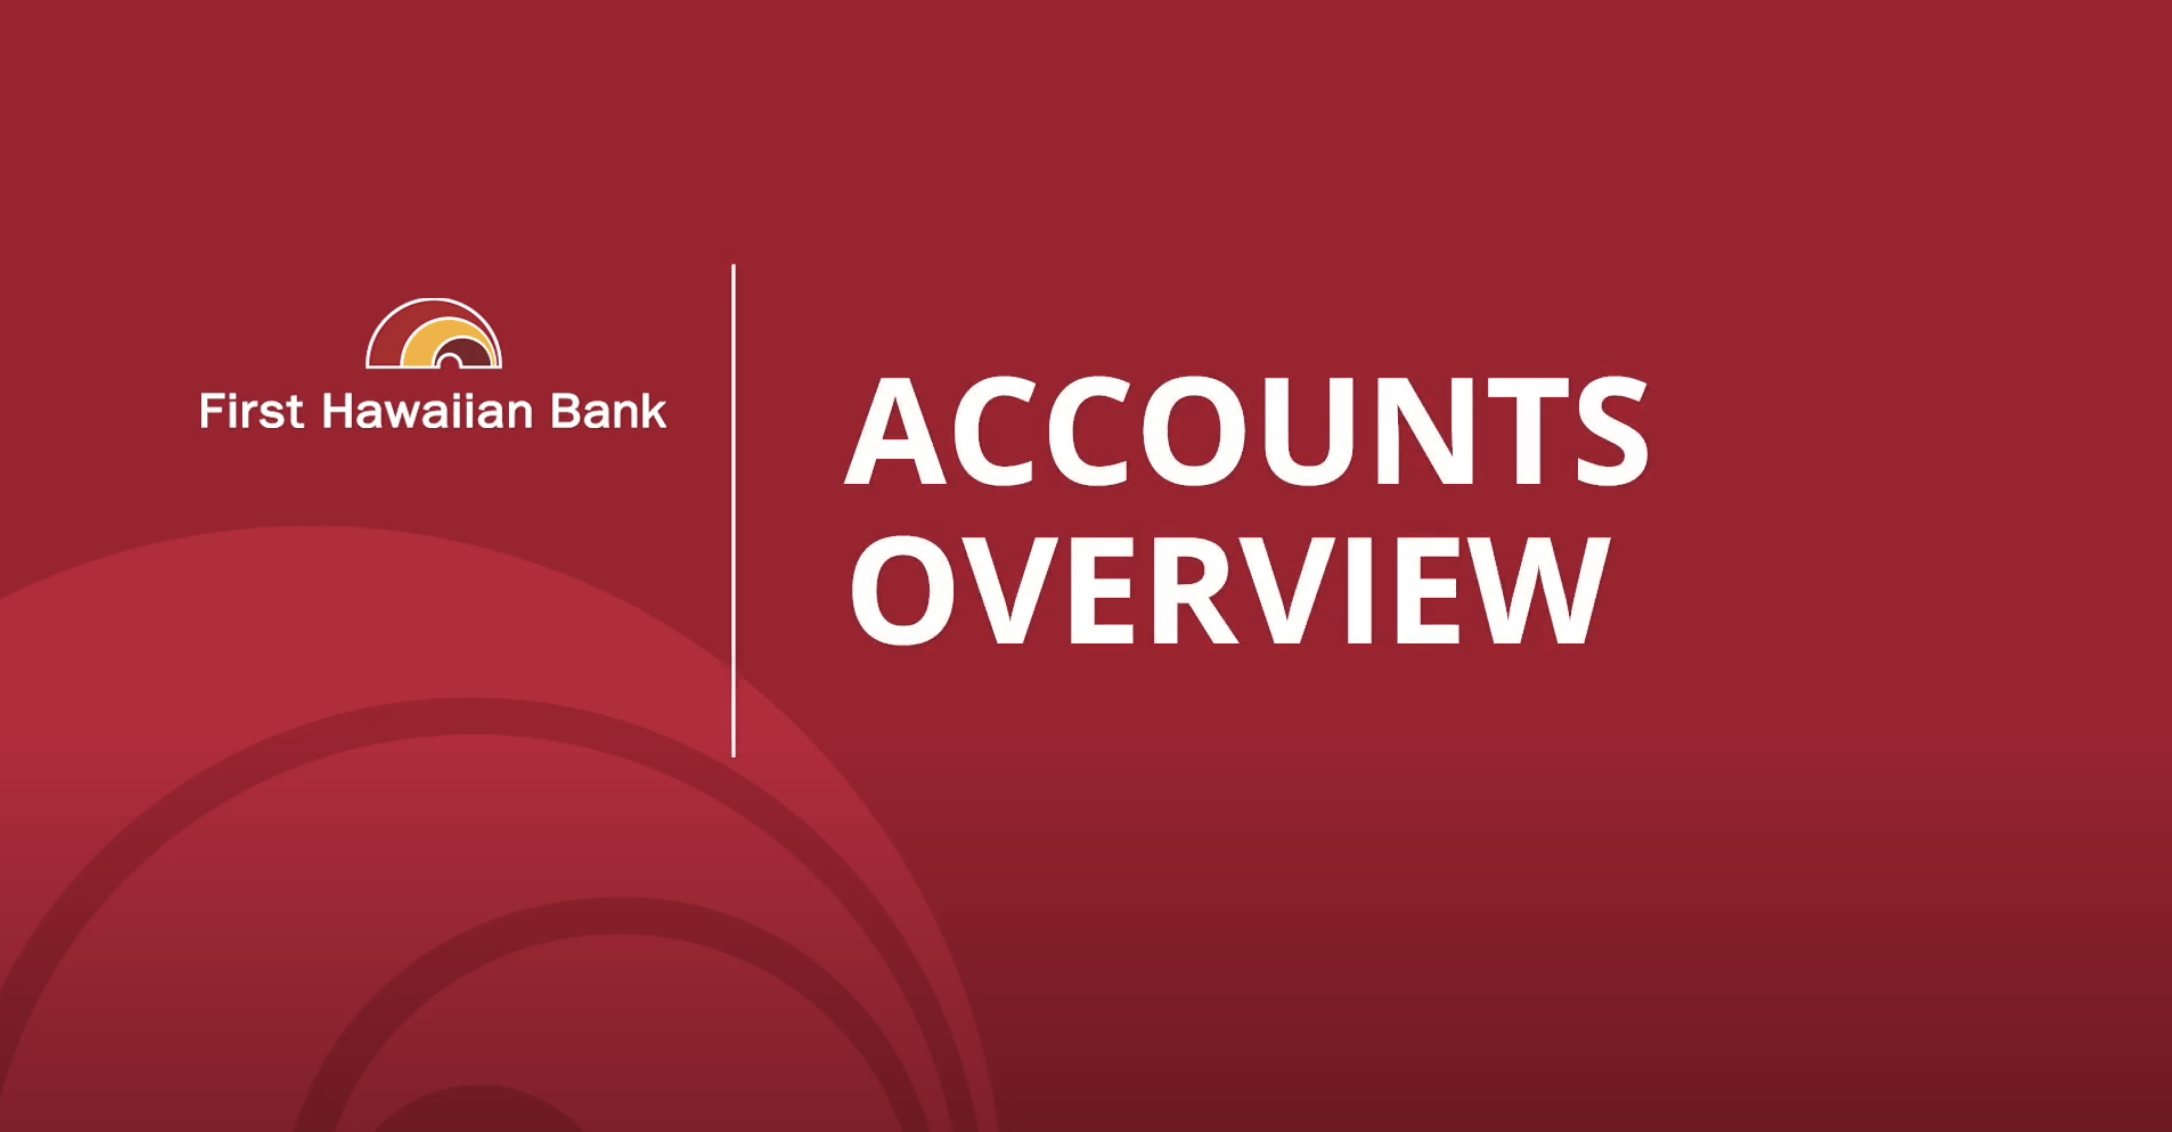 Accounts Overview